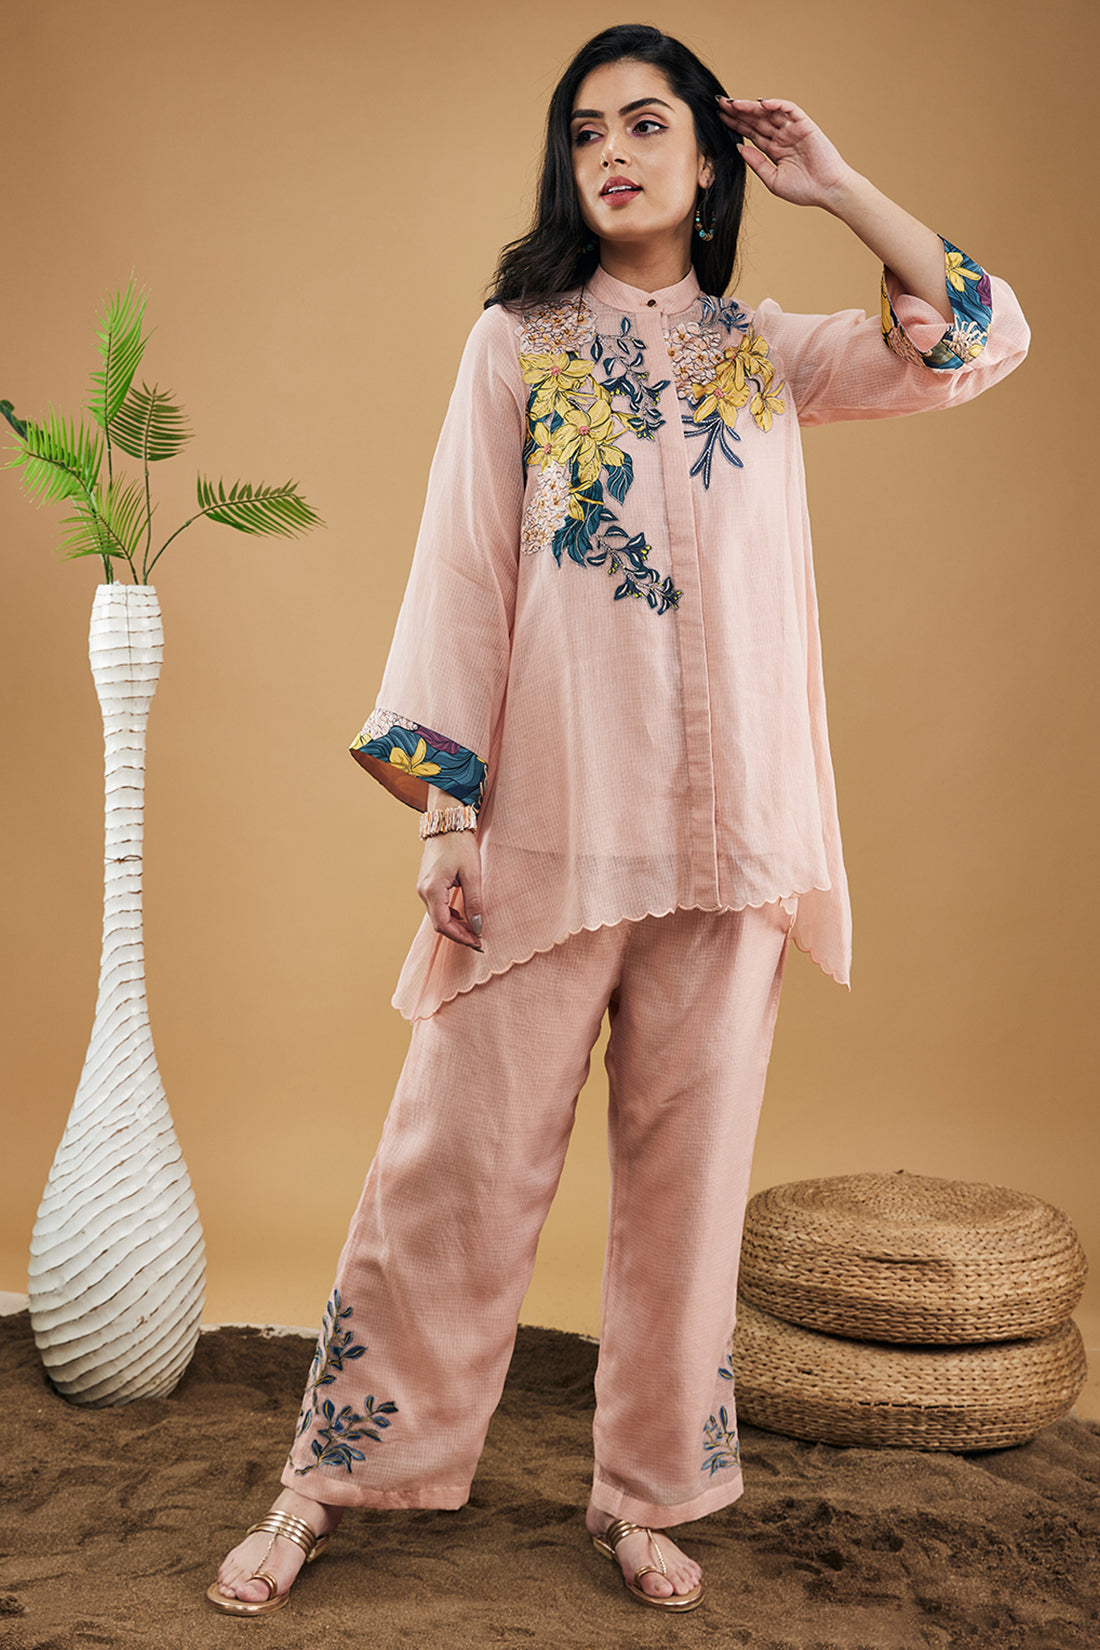 Zinnia Applique High-low Shirt With Pants